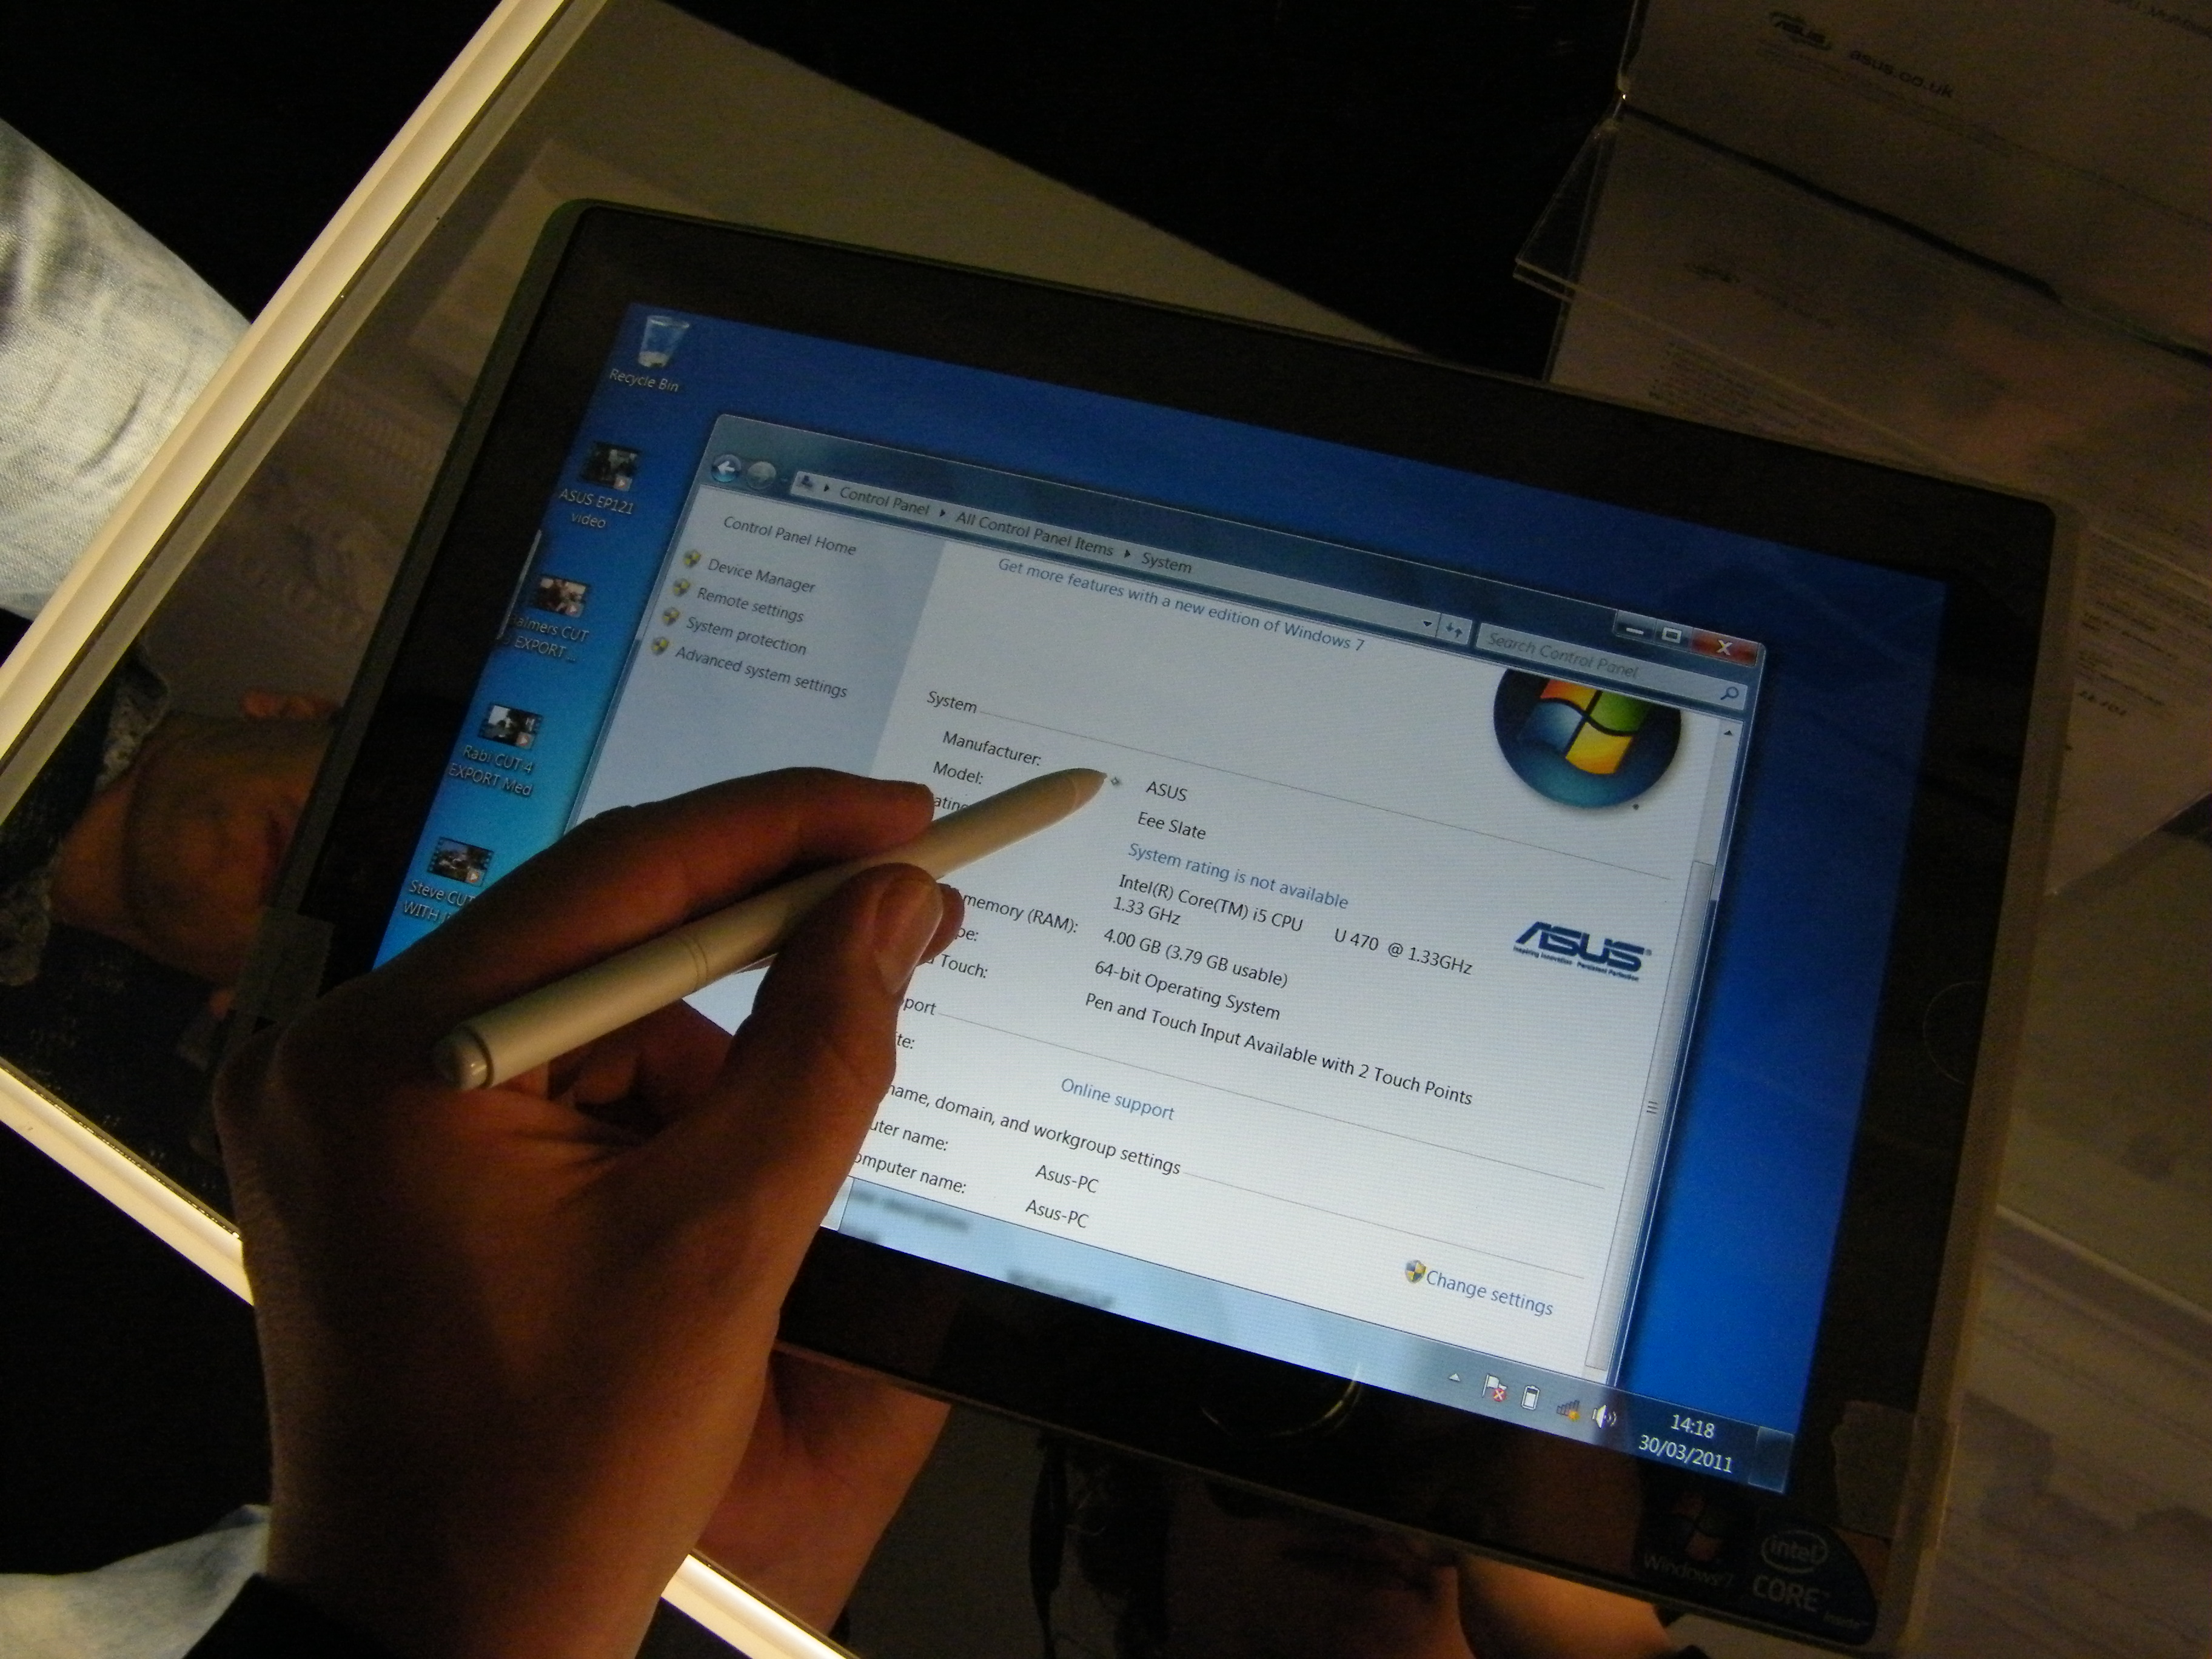 tablets with windows 7